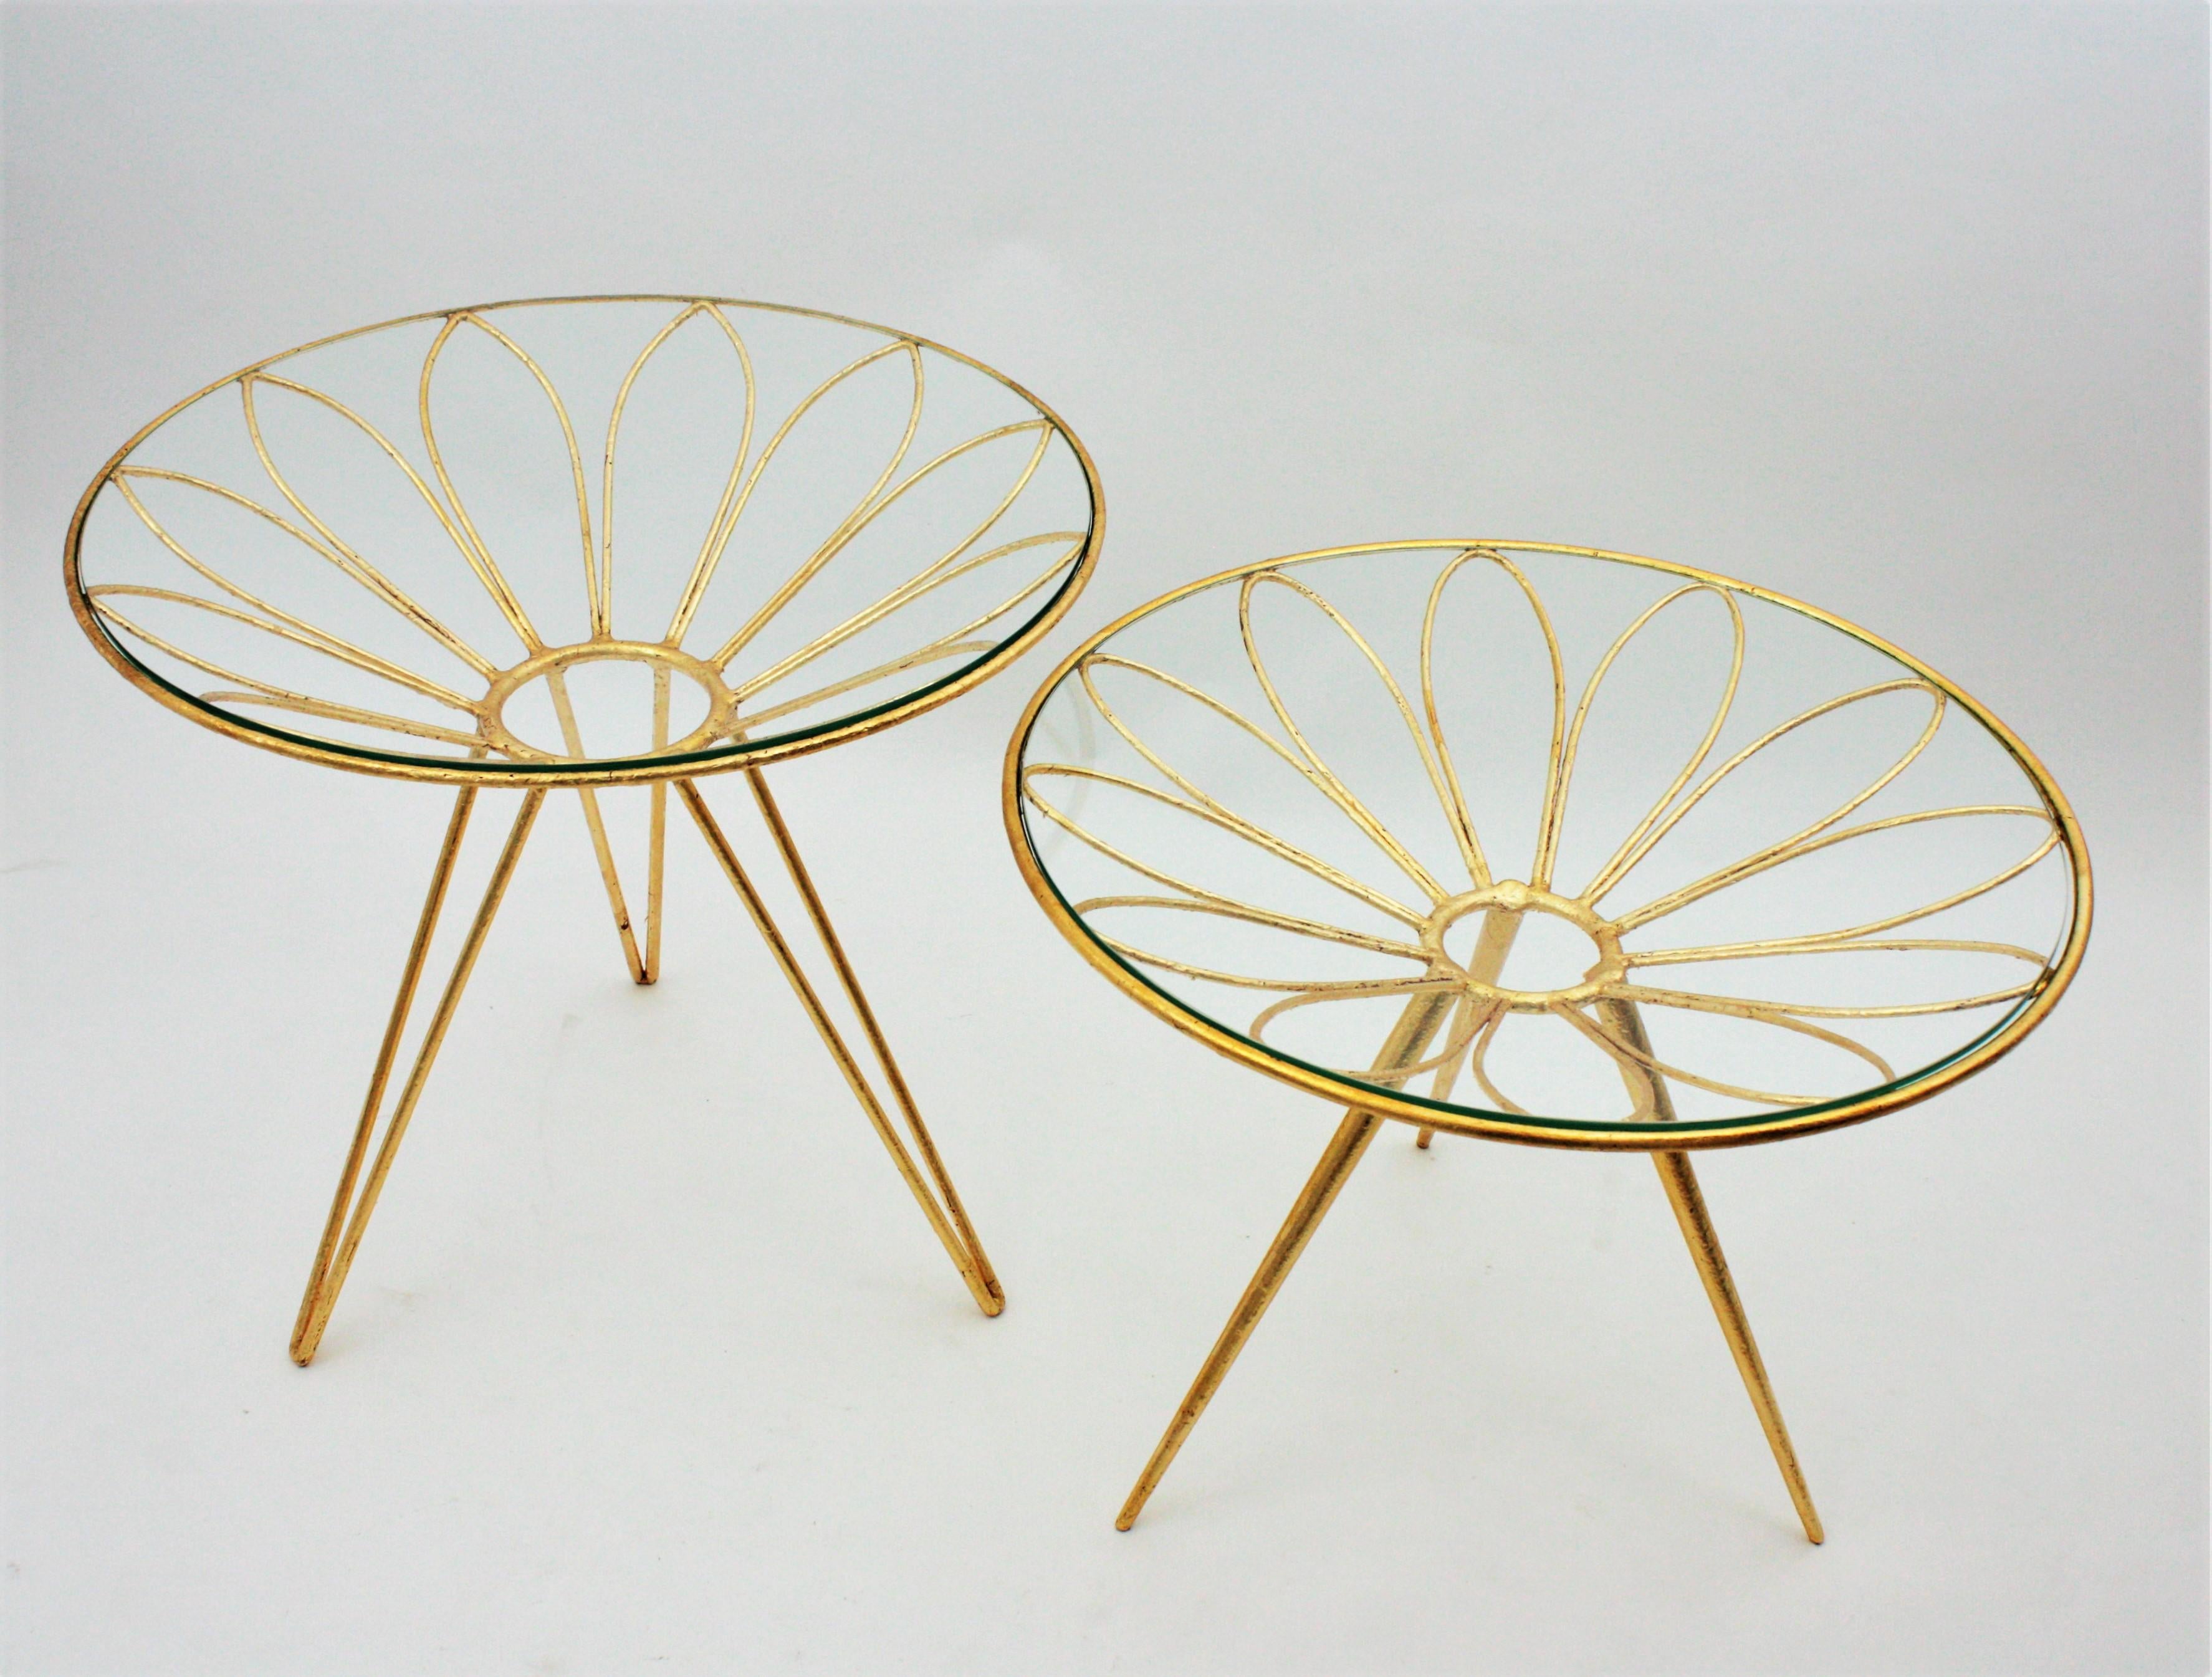 Hand-Crafted French Side Tables in Gilt Iron Daisy Flower Design, 1950s For Sale